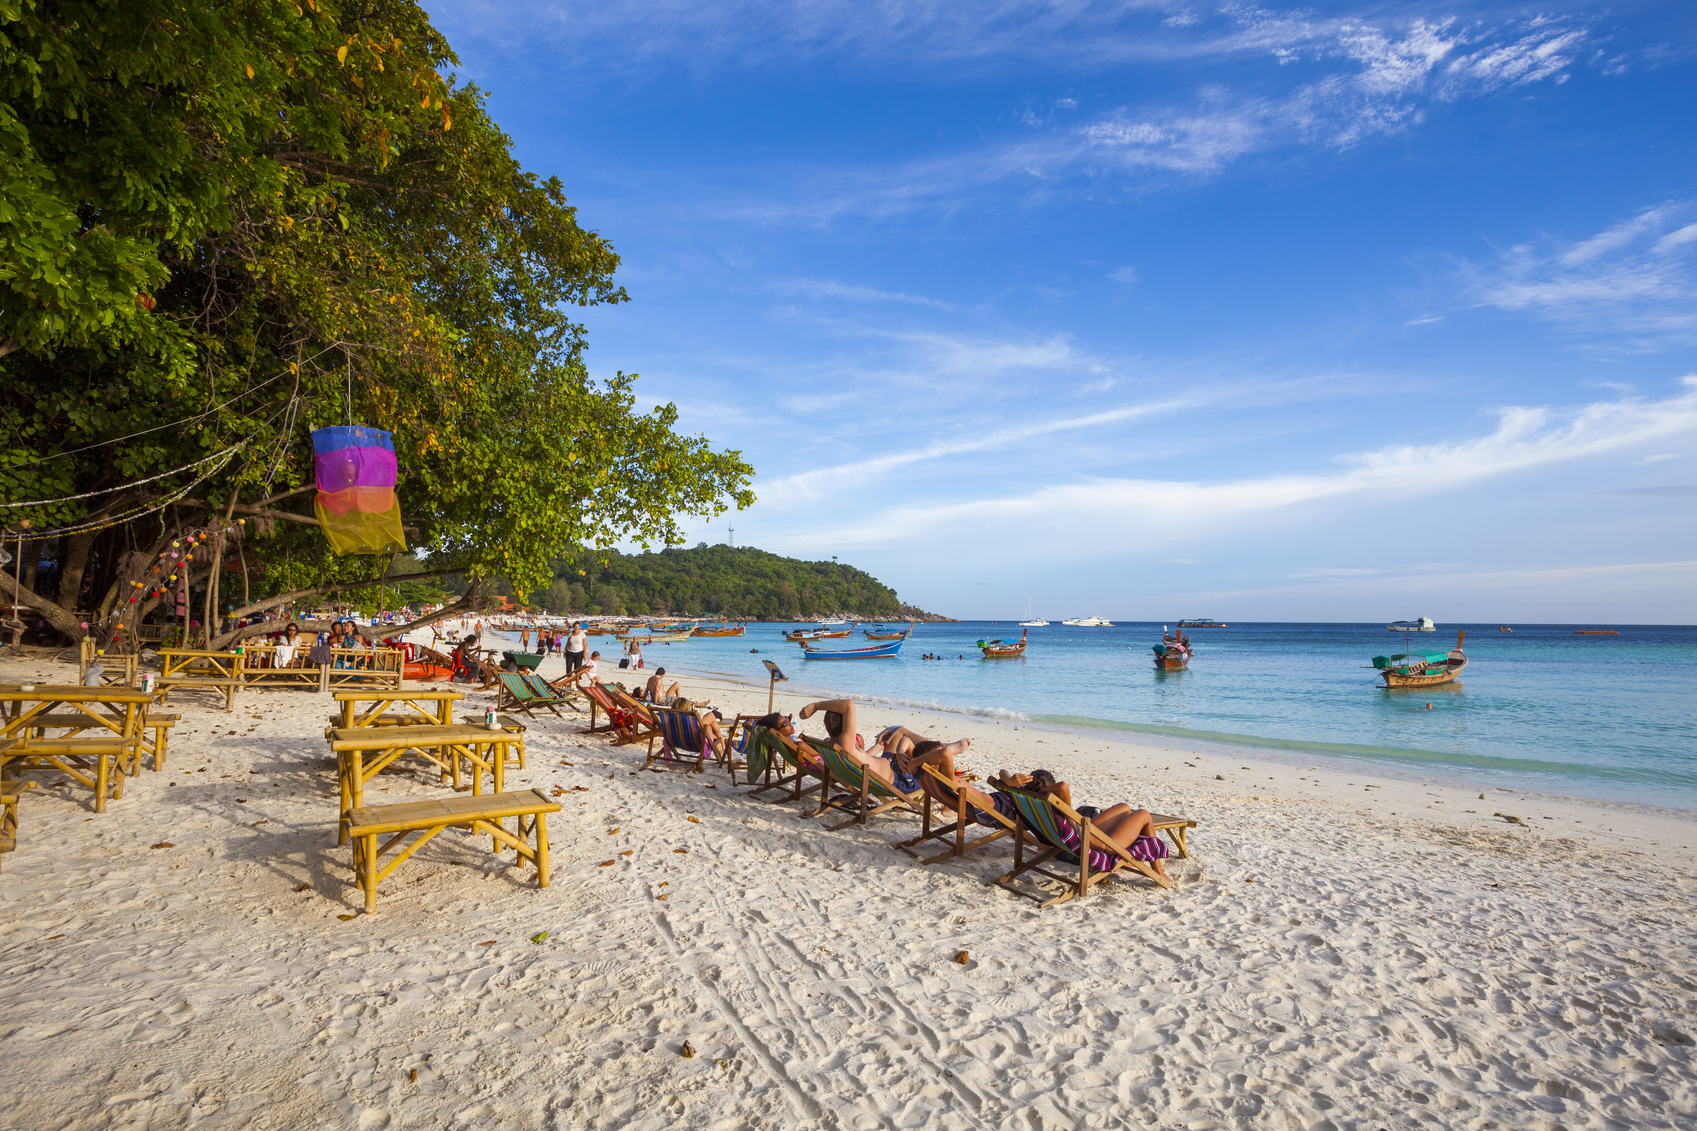 Satun, Thailand - March 12, 2011: People sunbathing in the shores of Koh Lipe beach in Satun, Thailand. Traditional longtail boats can be seen in the background.